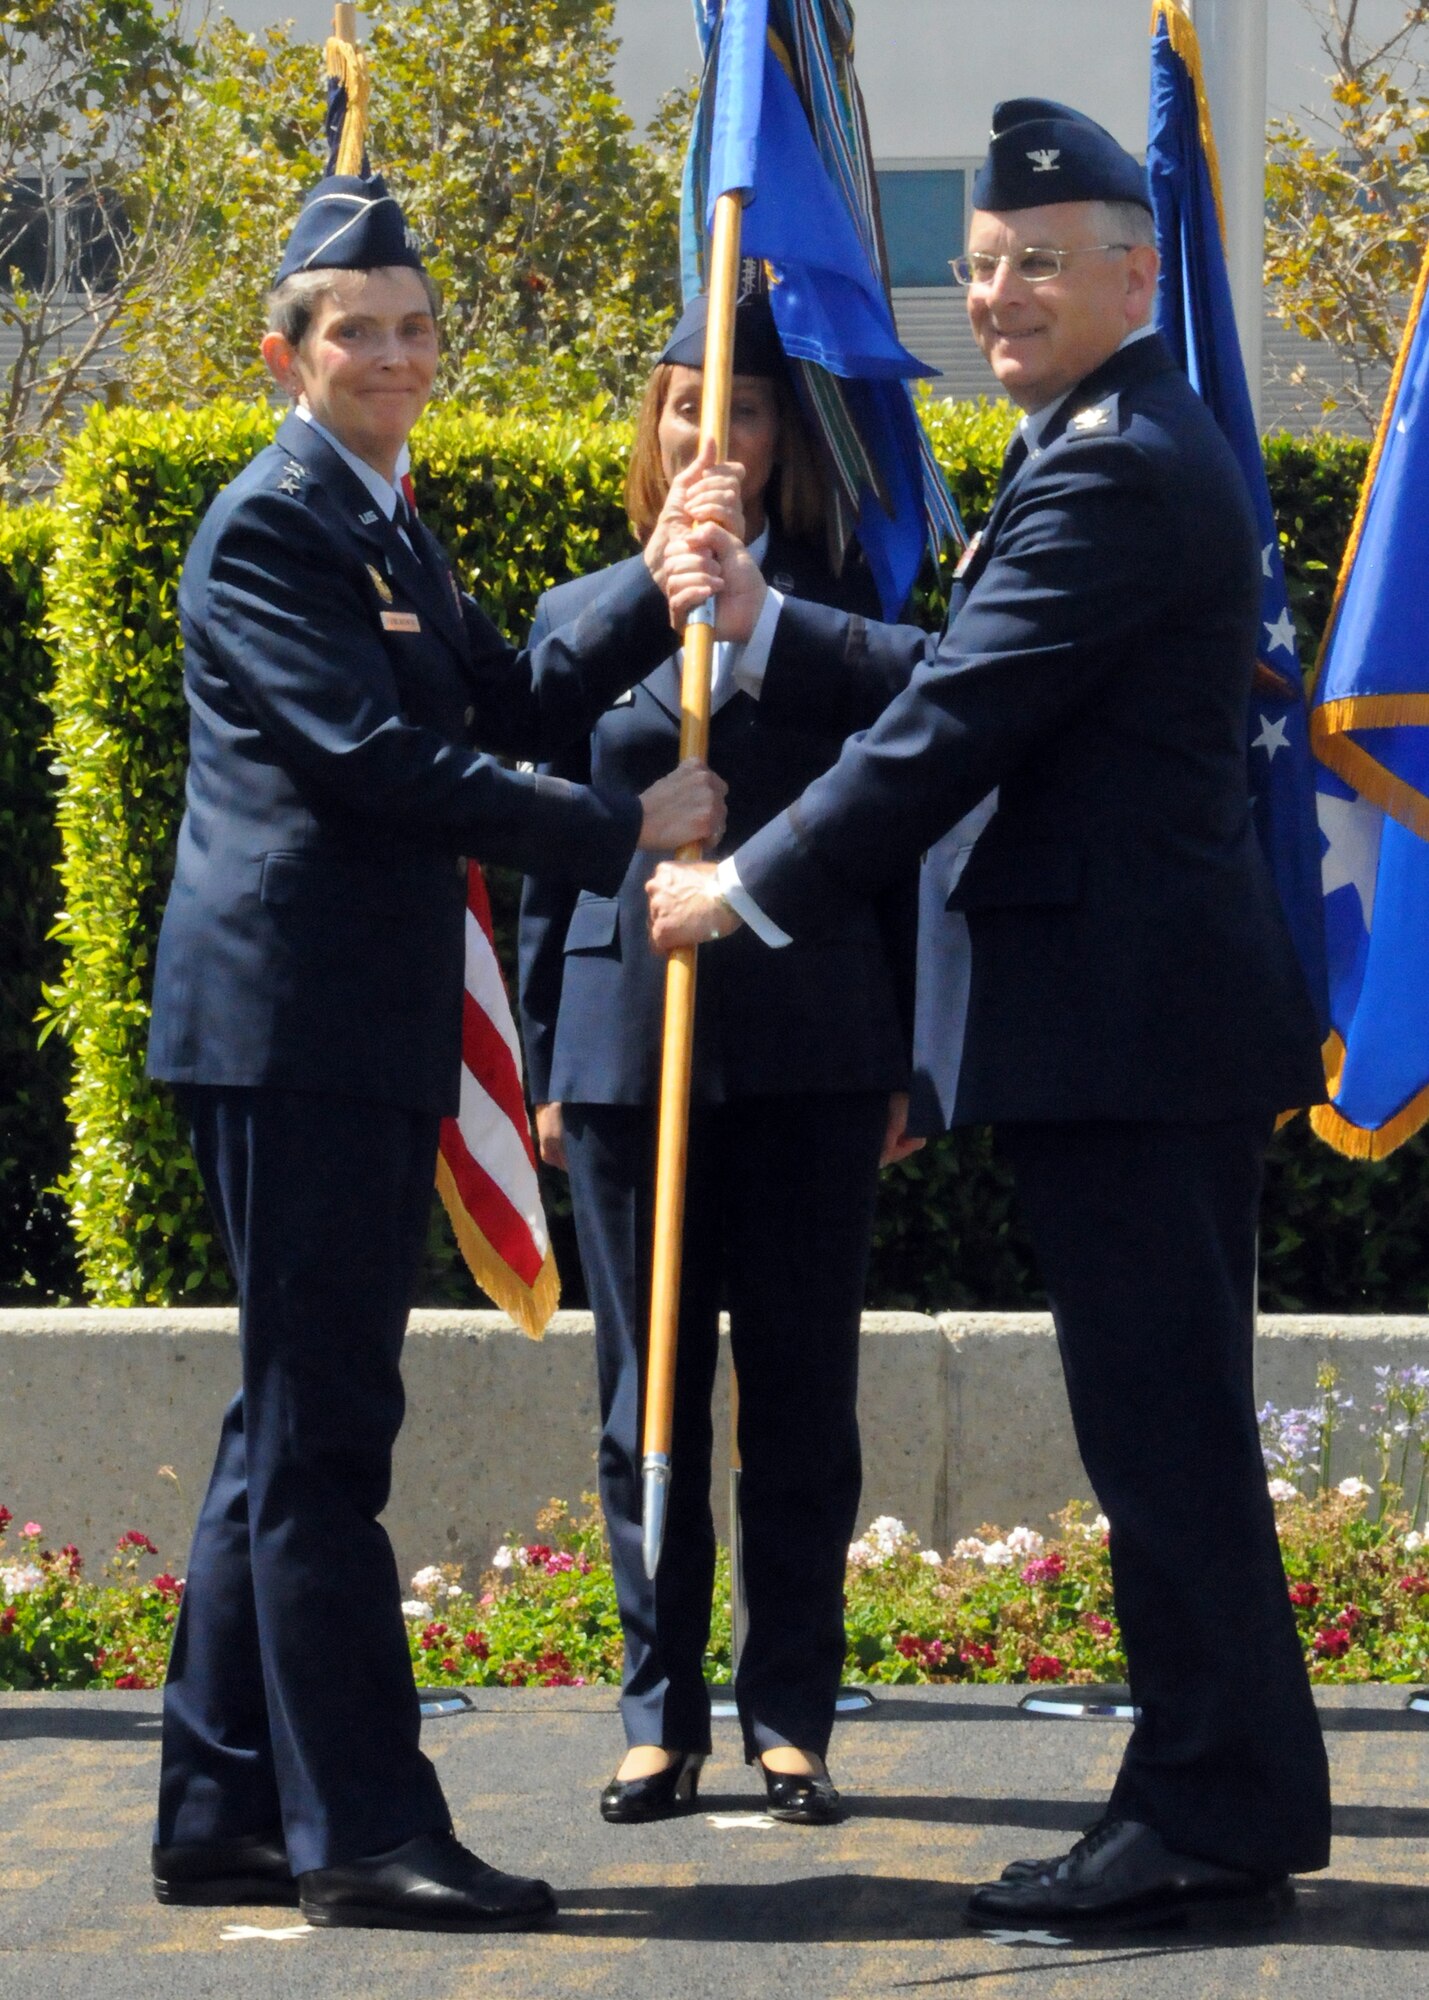 Colonel Samuel McNiel, new 61st ABG commander, receives the group’s flag from Lt. Gen. Ellen Pawlikowski during the 61st Air Base Group’s change of command ceremony, June 29. (Photo by Jim Gordon)